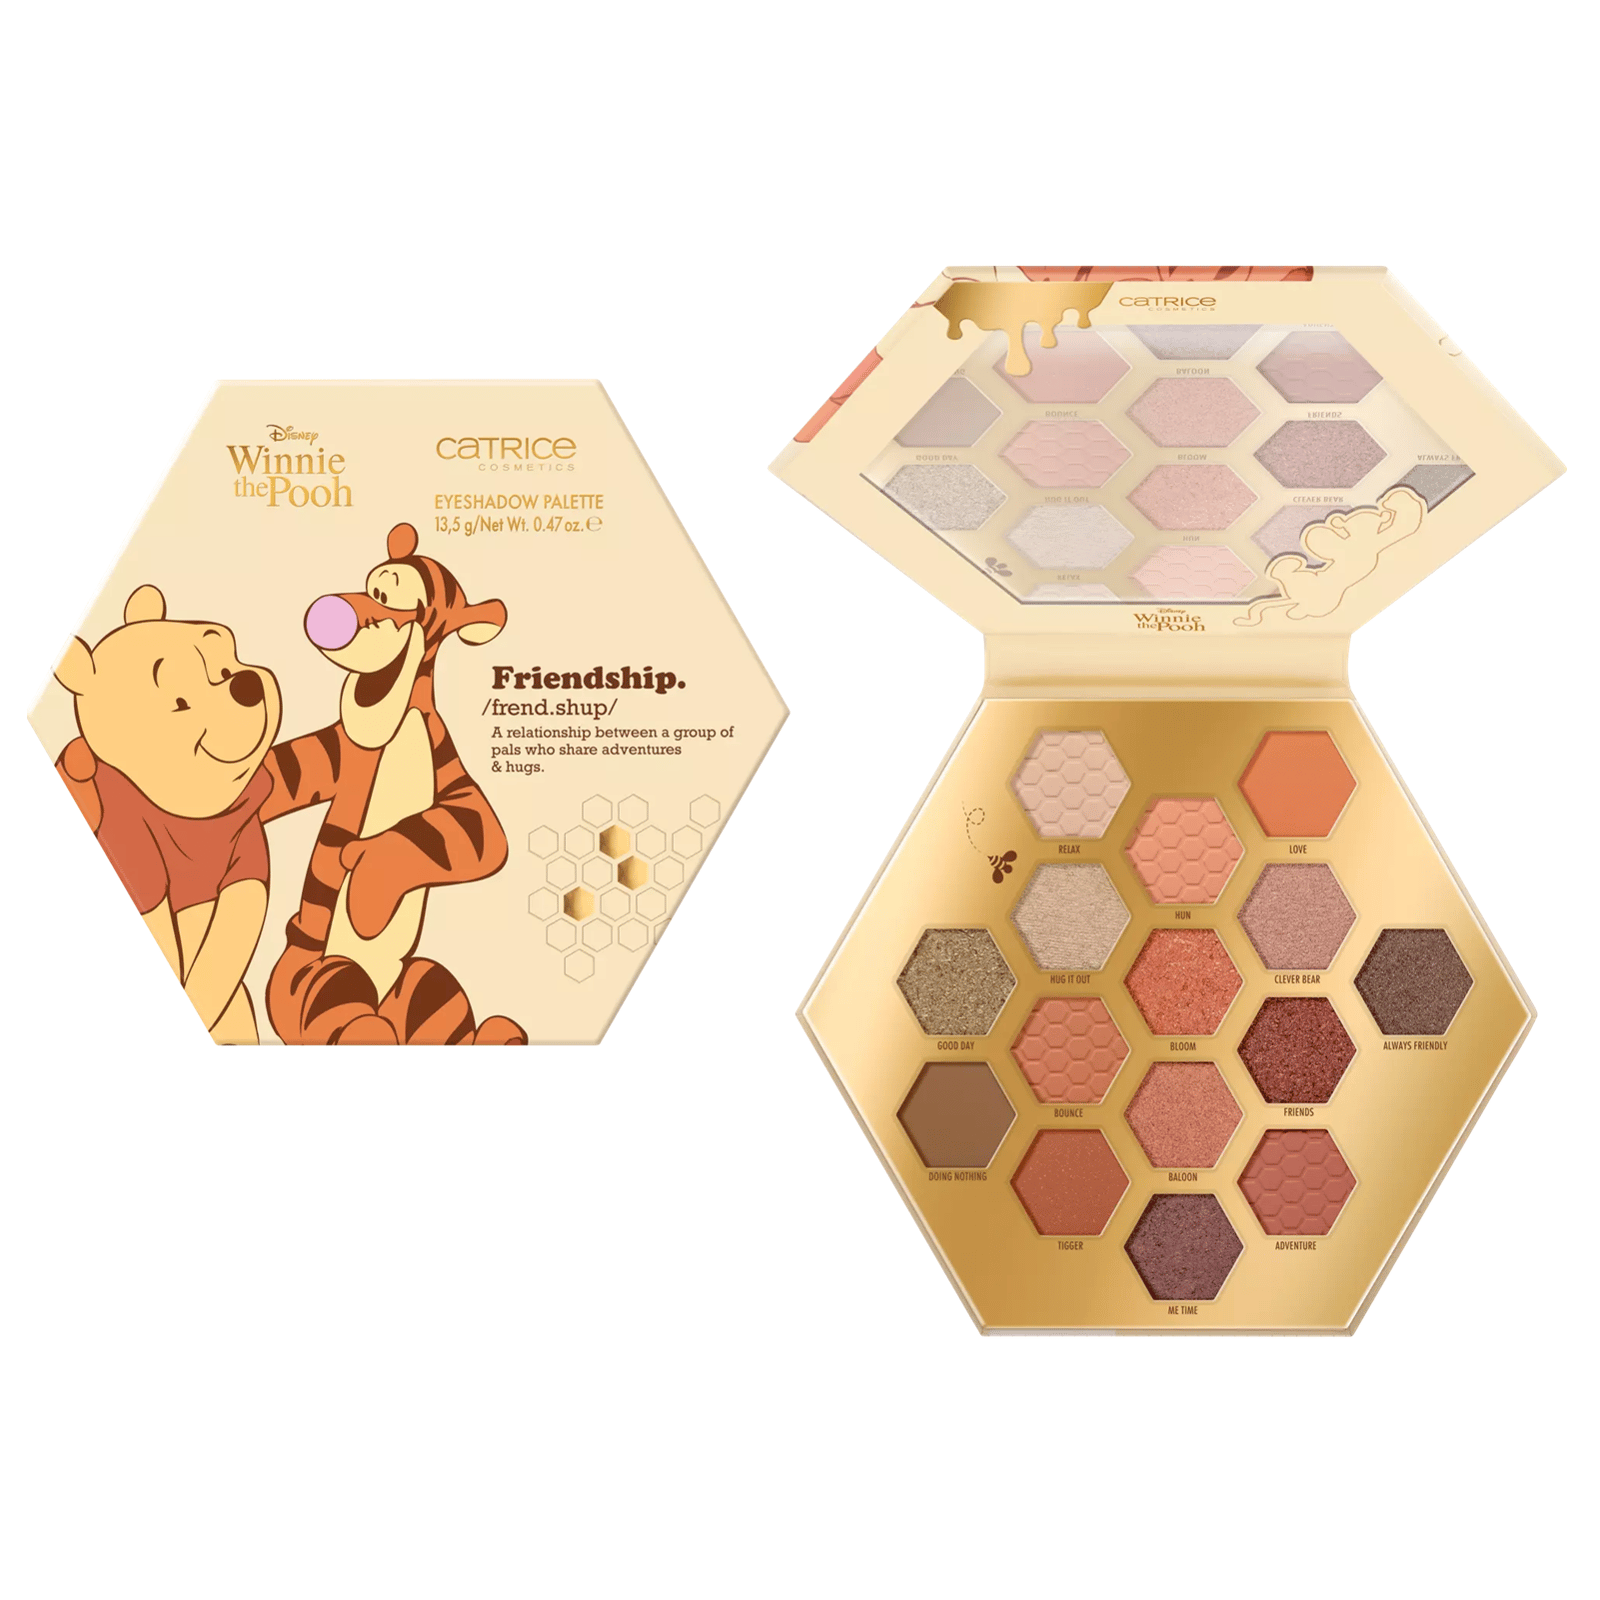 Catrice Disney Winnie The Pooh Eyeshadow Palette 030 It's a Good Day To Have a Good Day 13.5g (0.47oz)